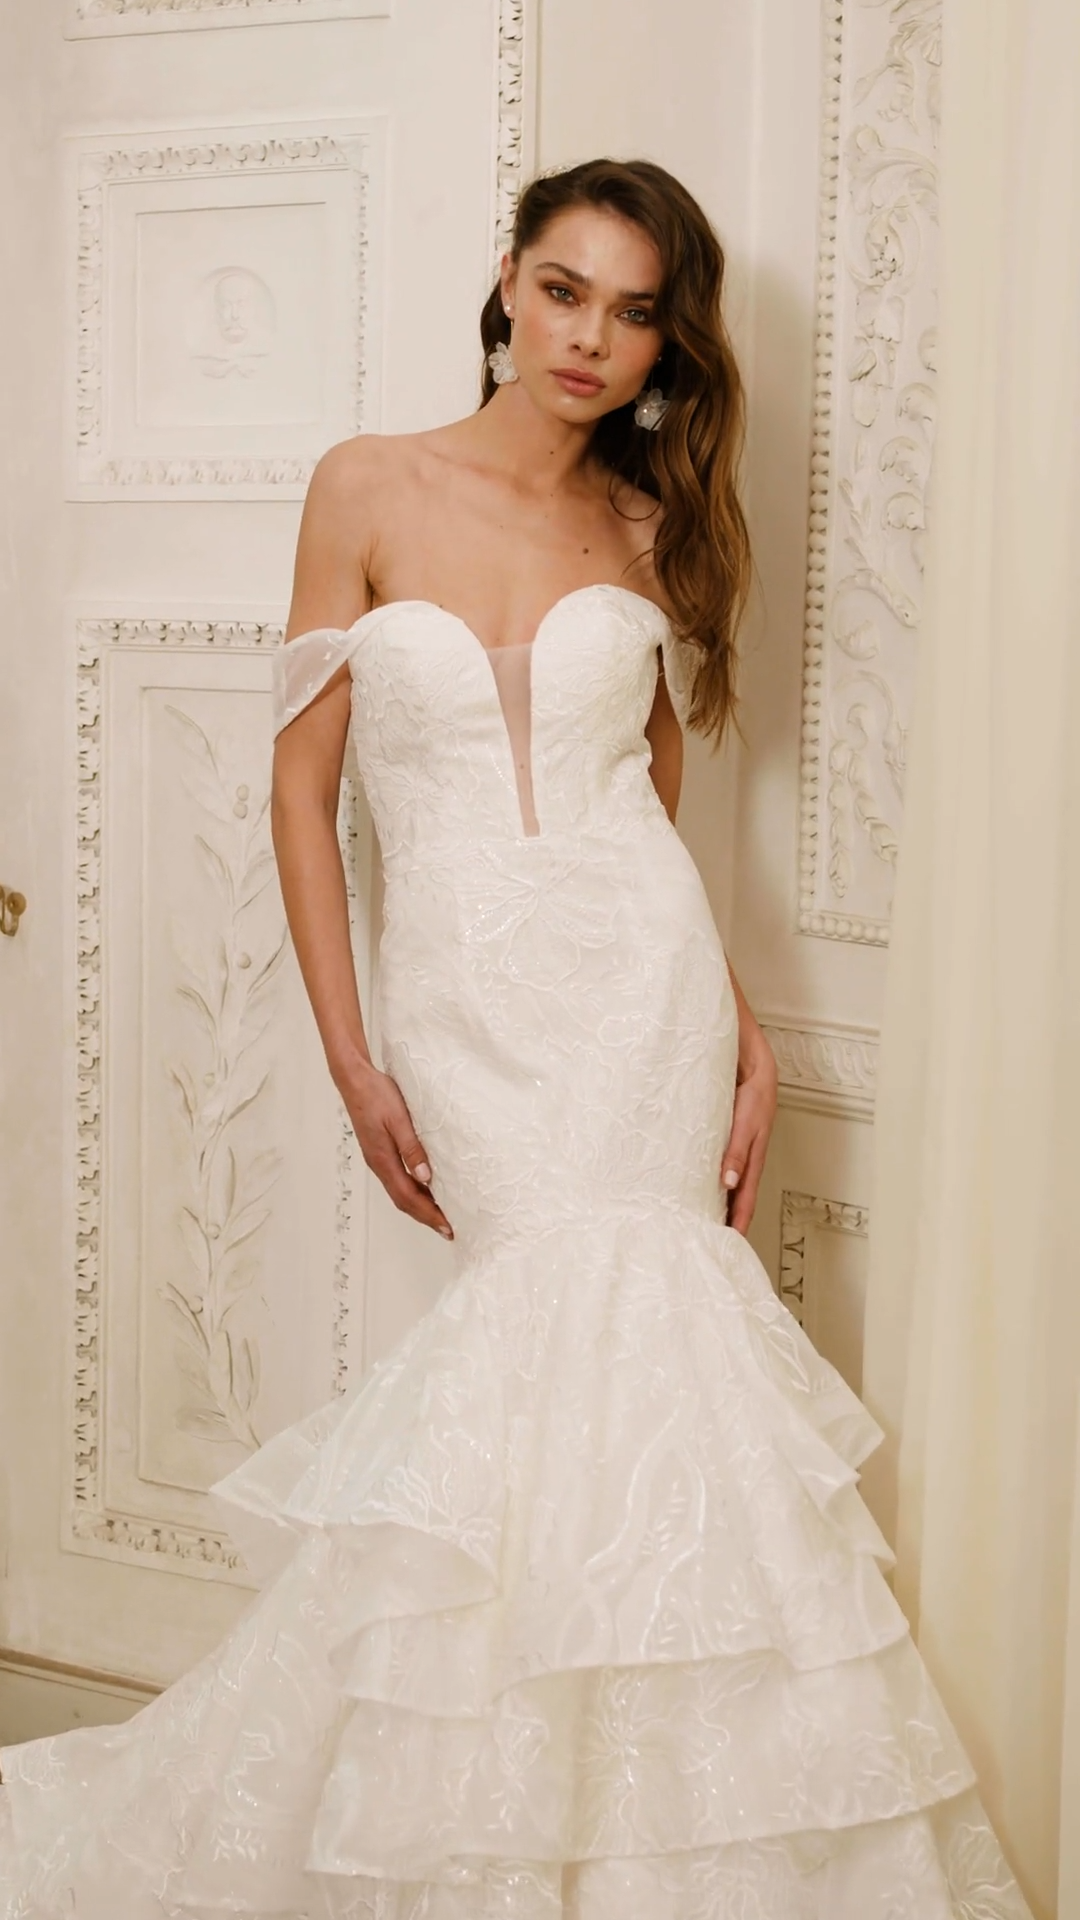 Moonlight Collection J6861 blush bridal gowns, ivory bridal gowns, white wedding dresses & more